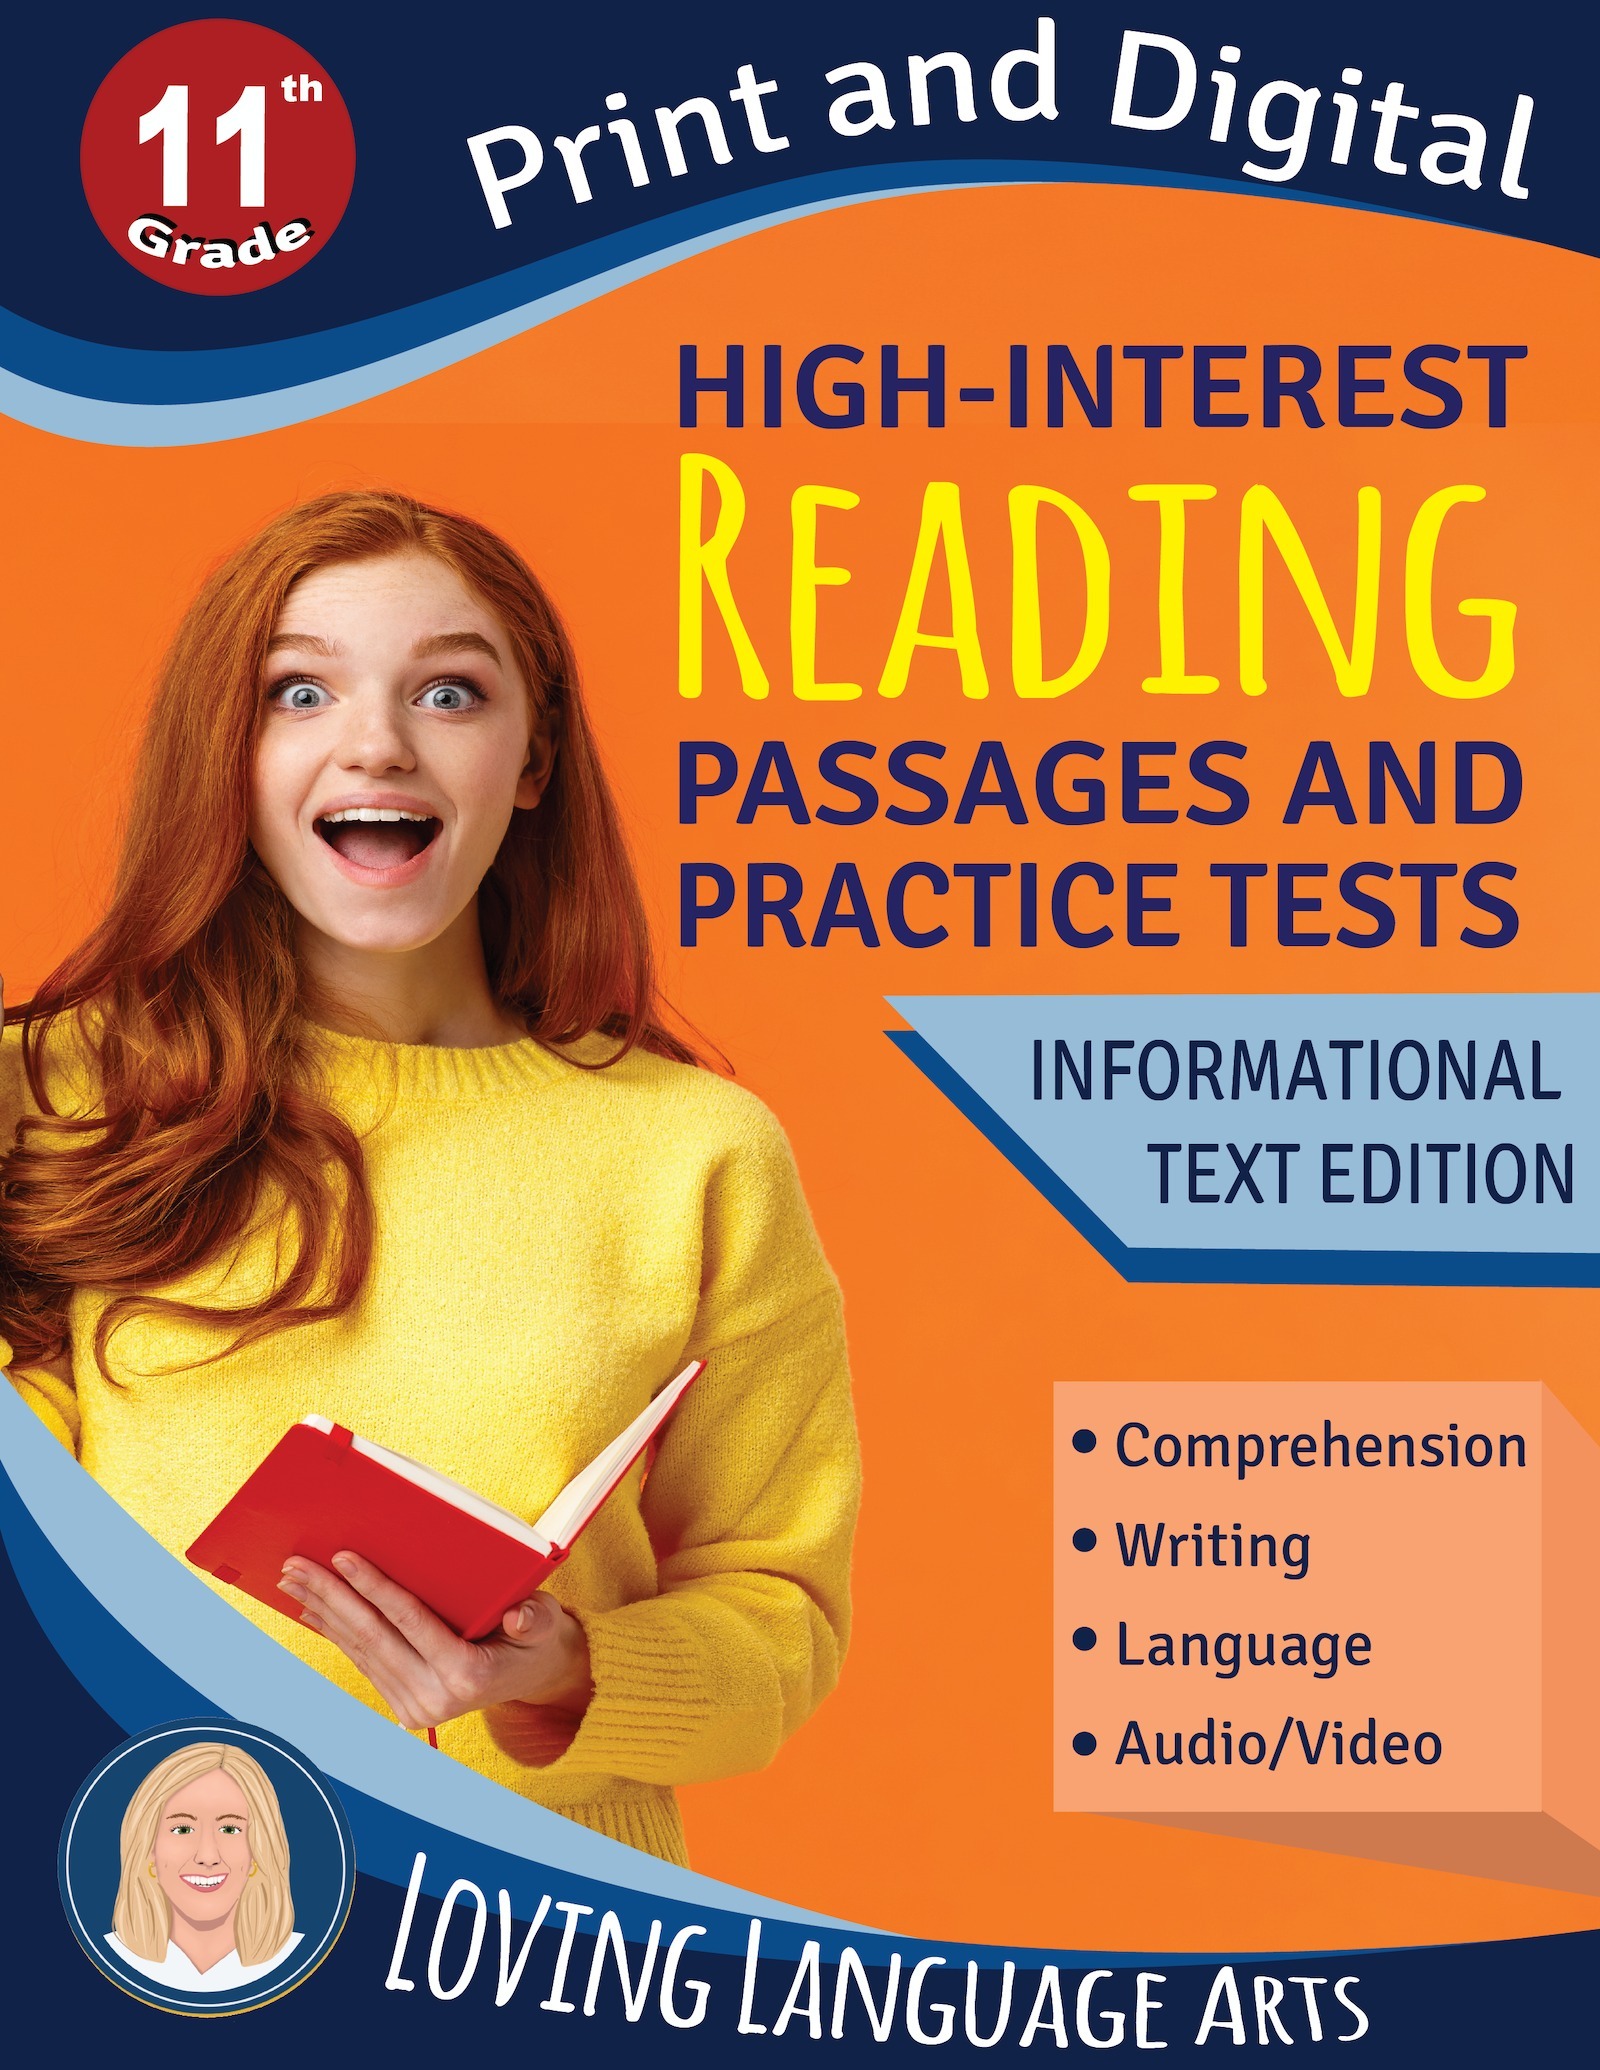 Grade 11 Reading Passages and Practice Tests Workbook - Informational Text Edition